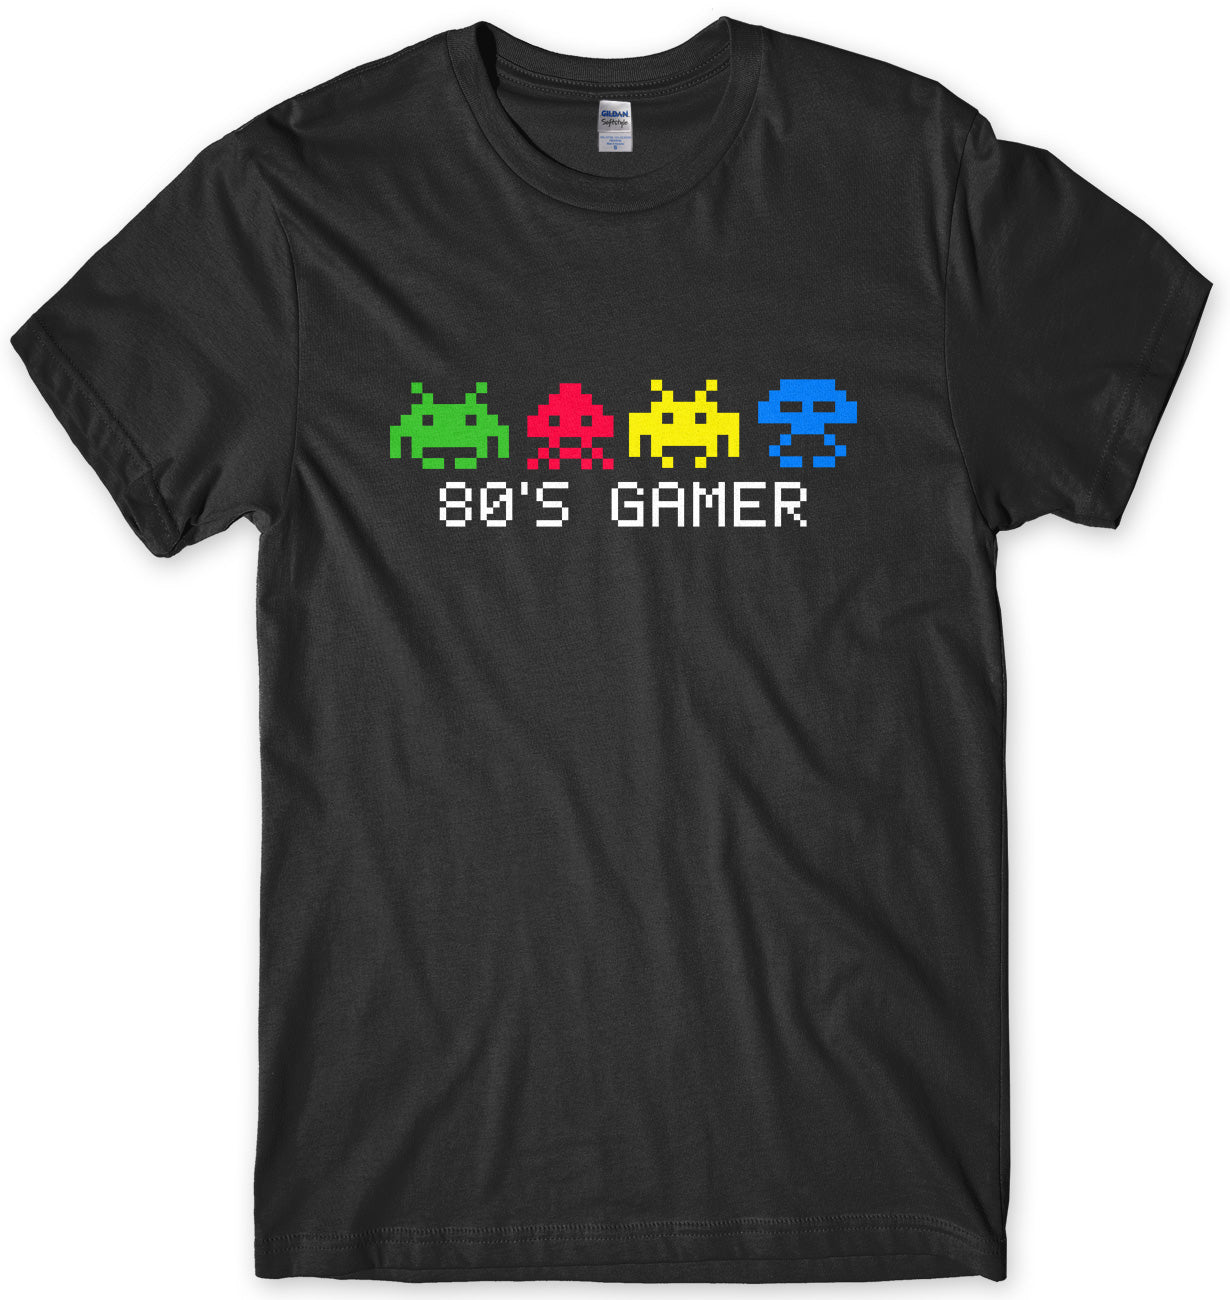 INVADERS FROM SPACE 80'S GAMER MENS UNISEX T-SHIRT